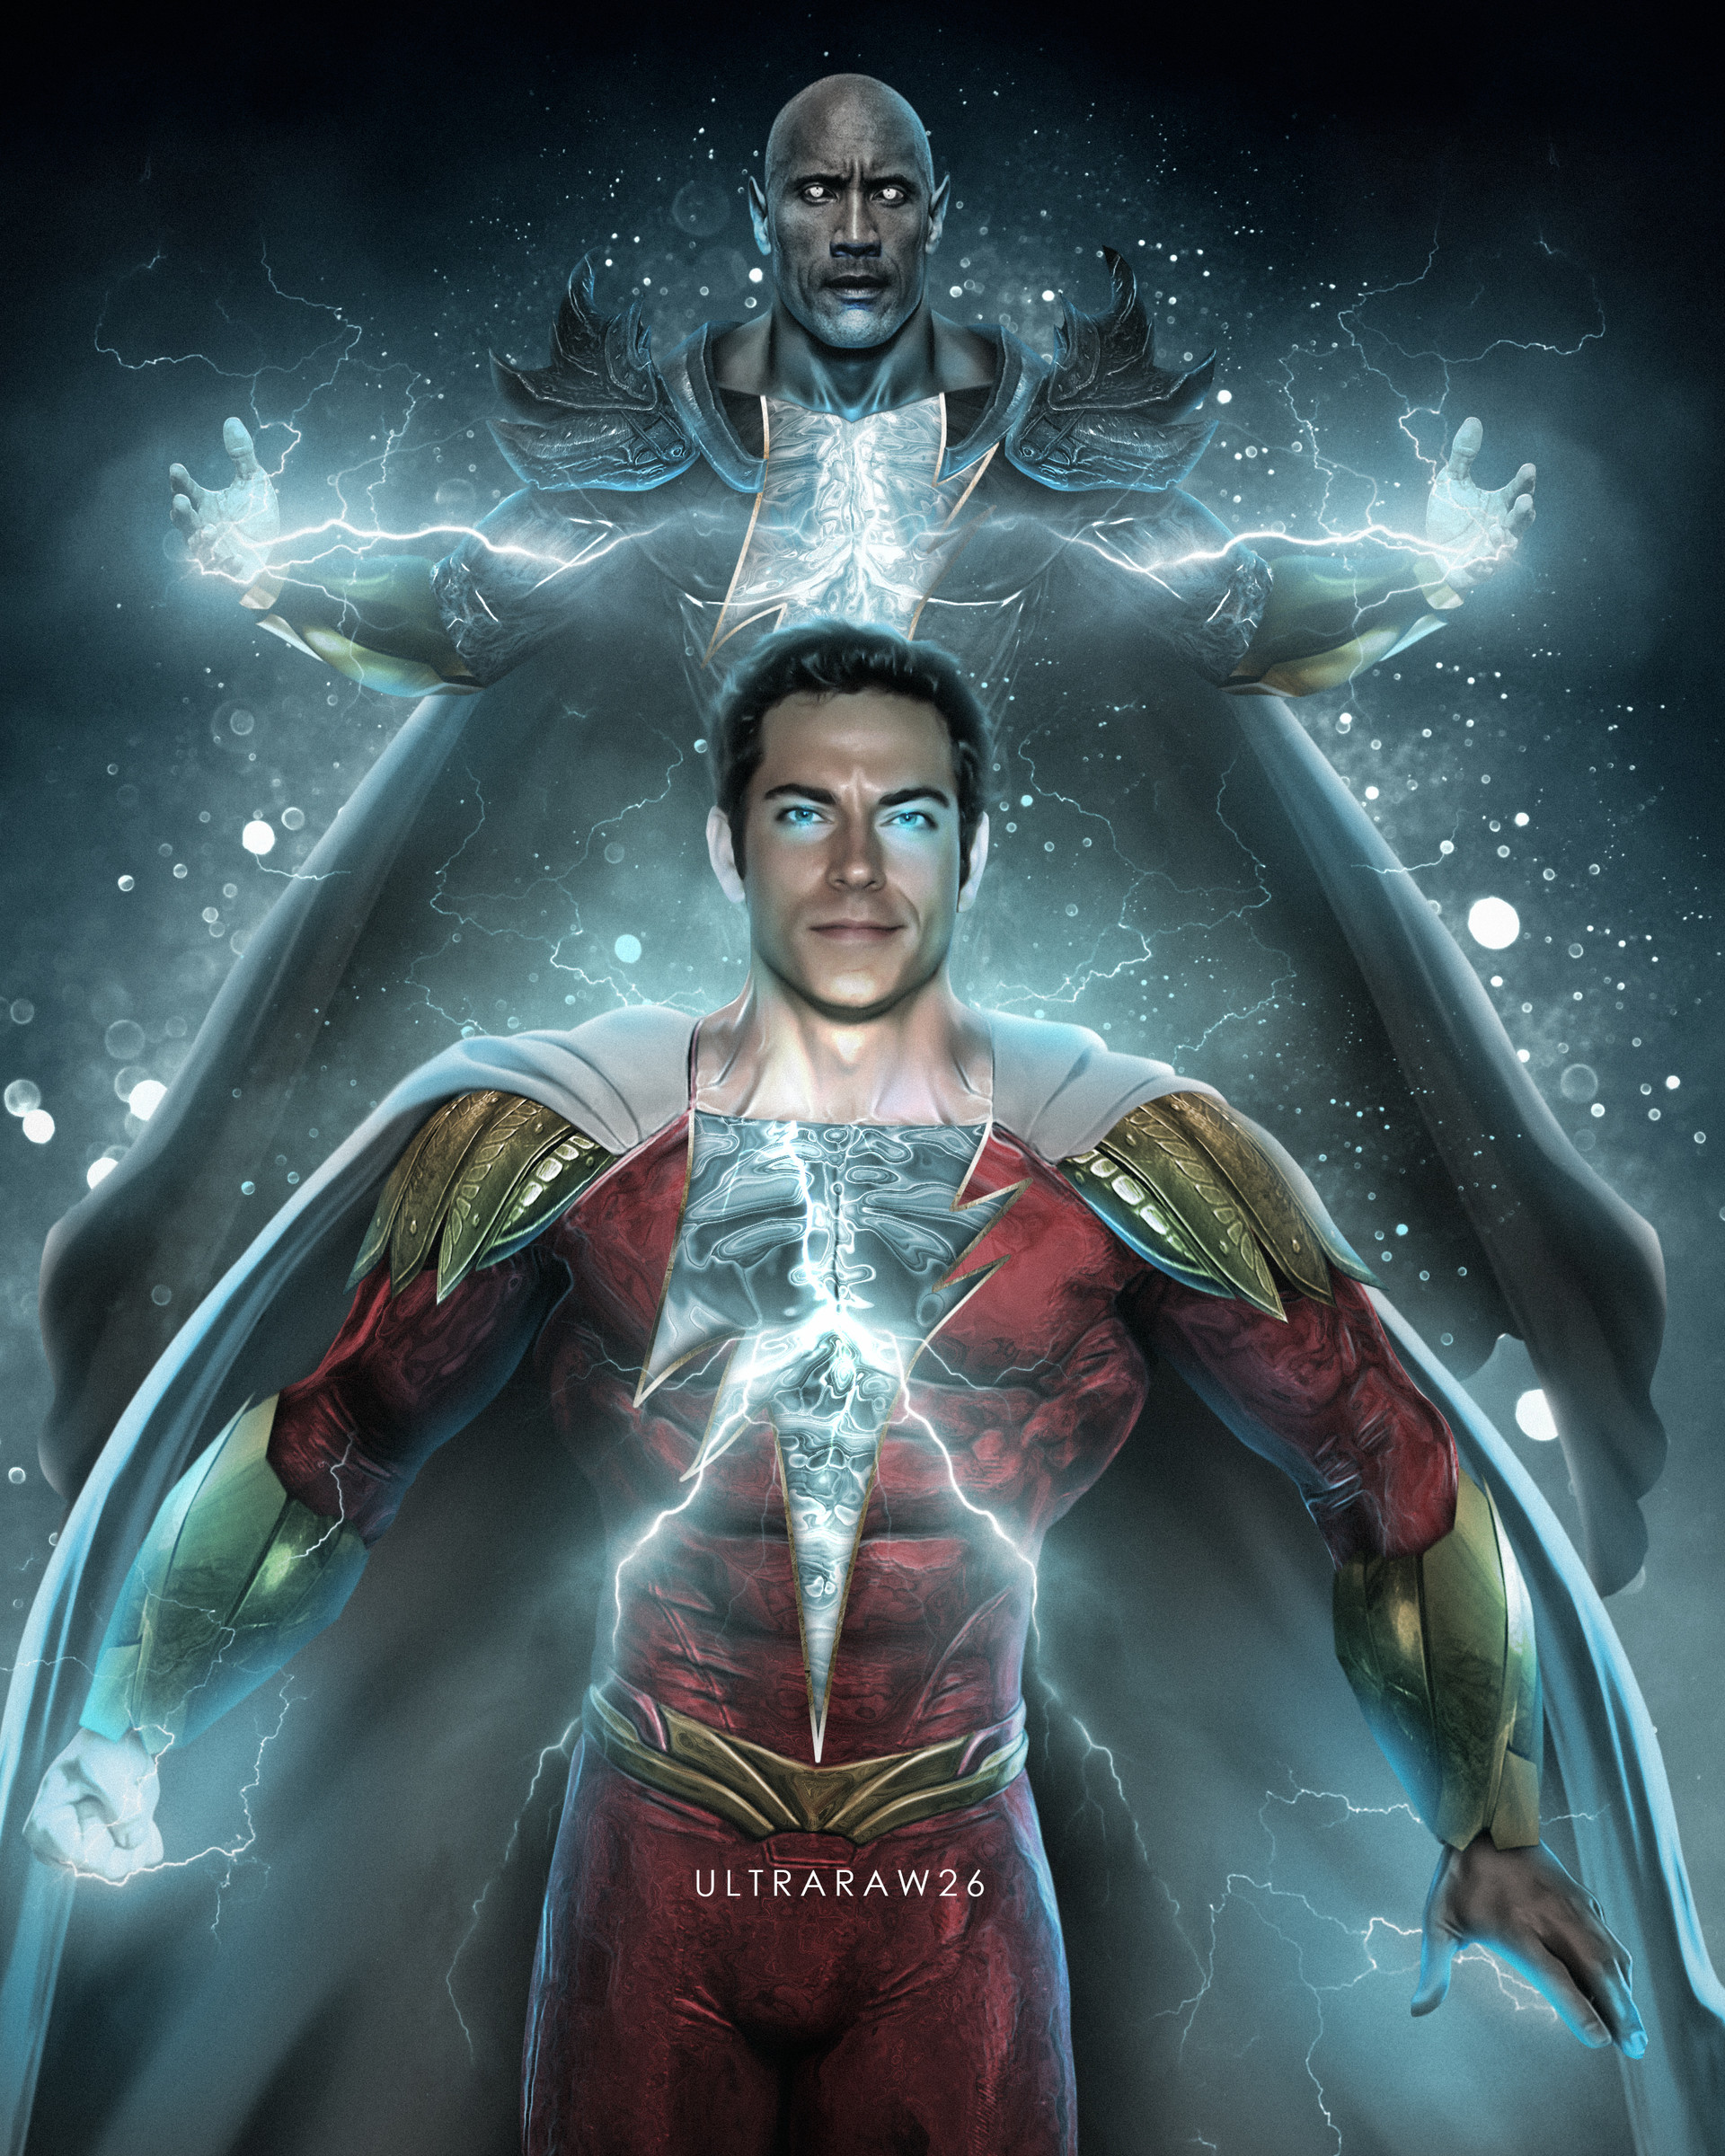 Shazam Movie Poster Wallpapers